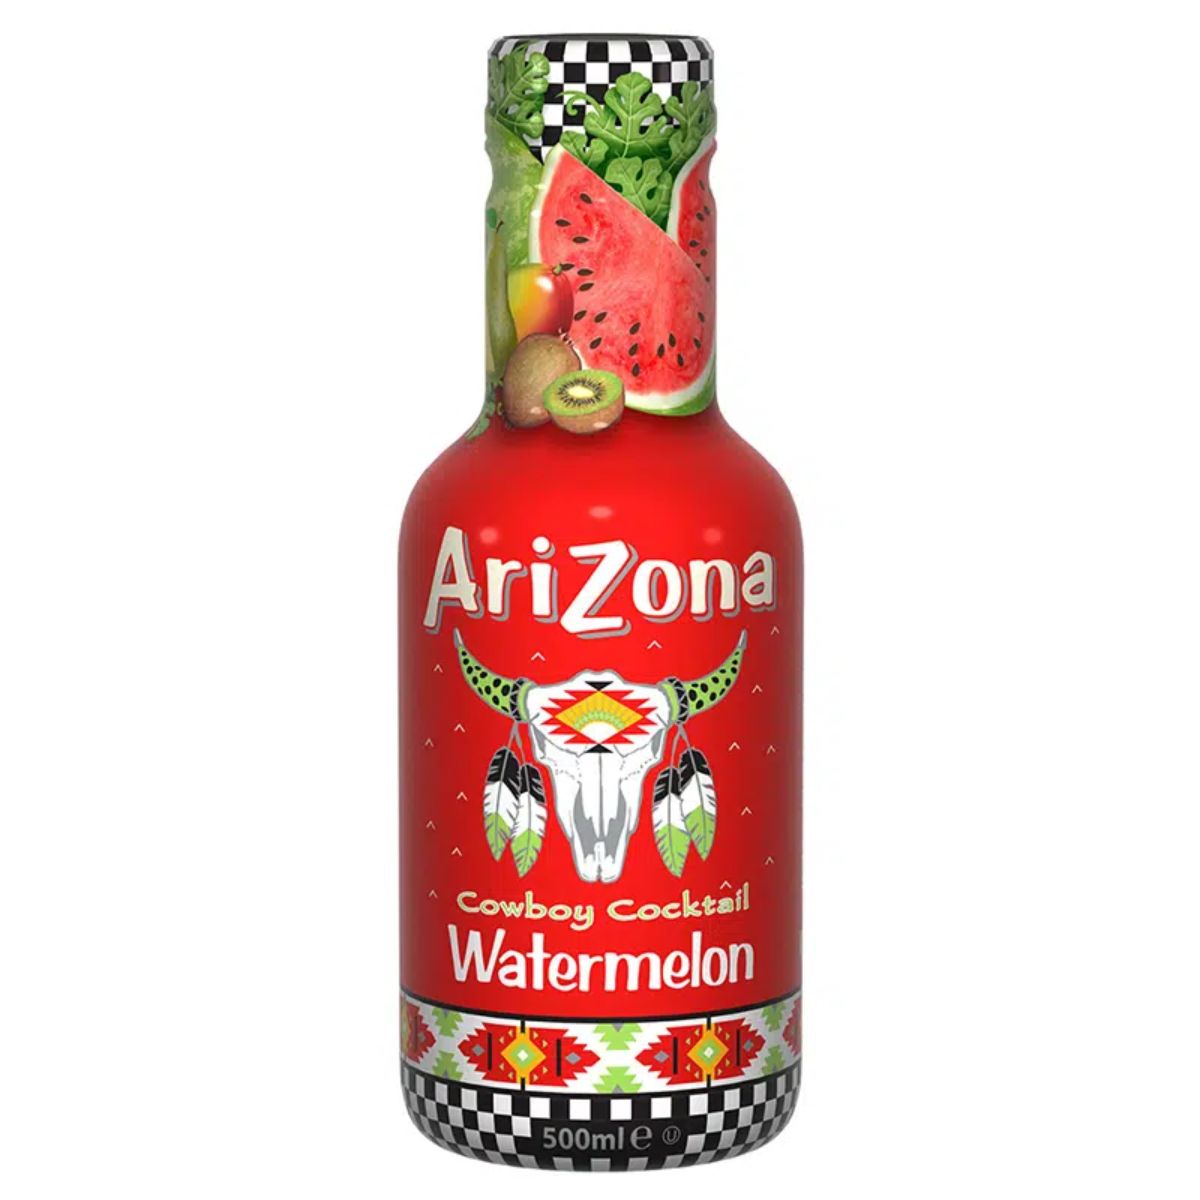 A bottle of Arizona - Watermelon Fruit Juice Cocktail - 500ml on a white background.